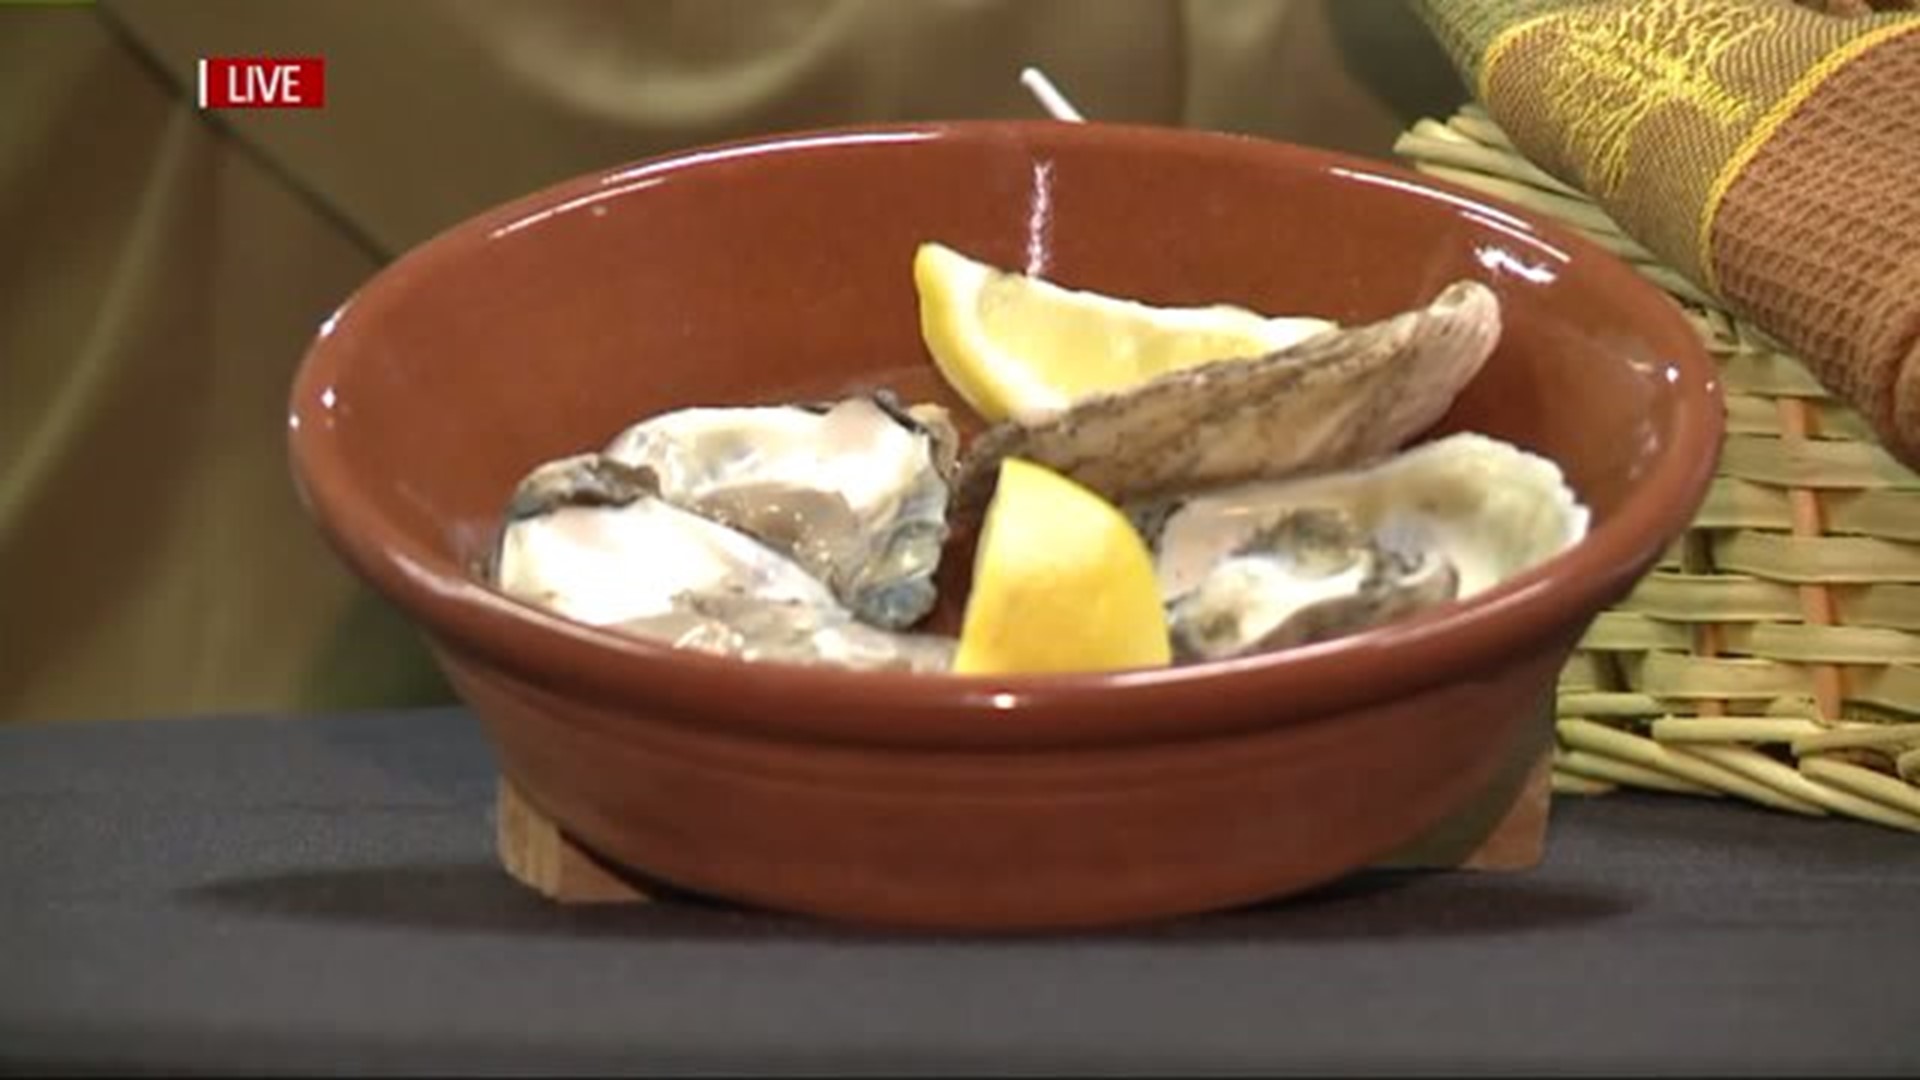 Oyster festival comes to town